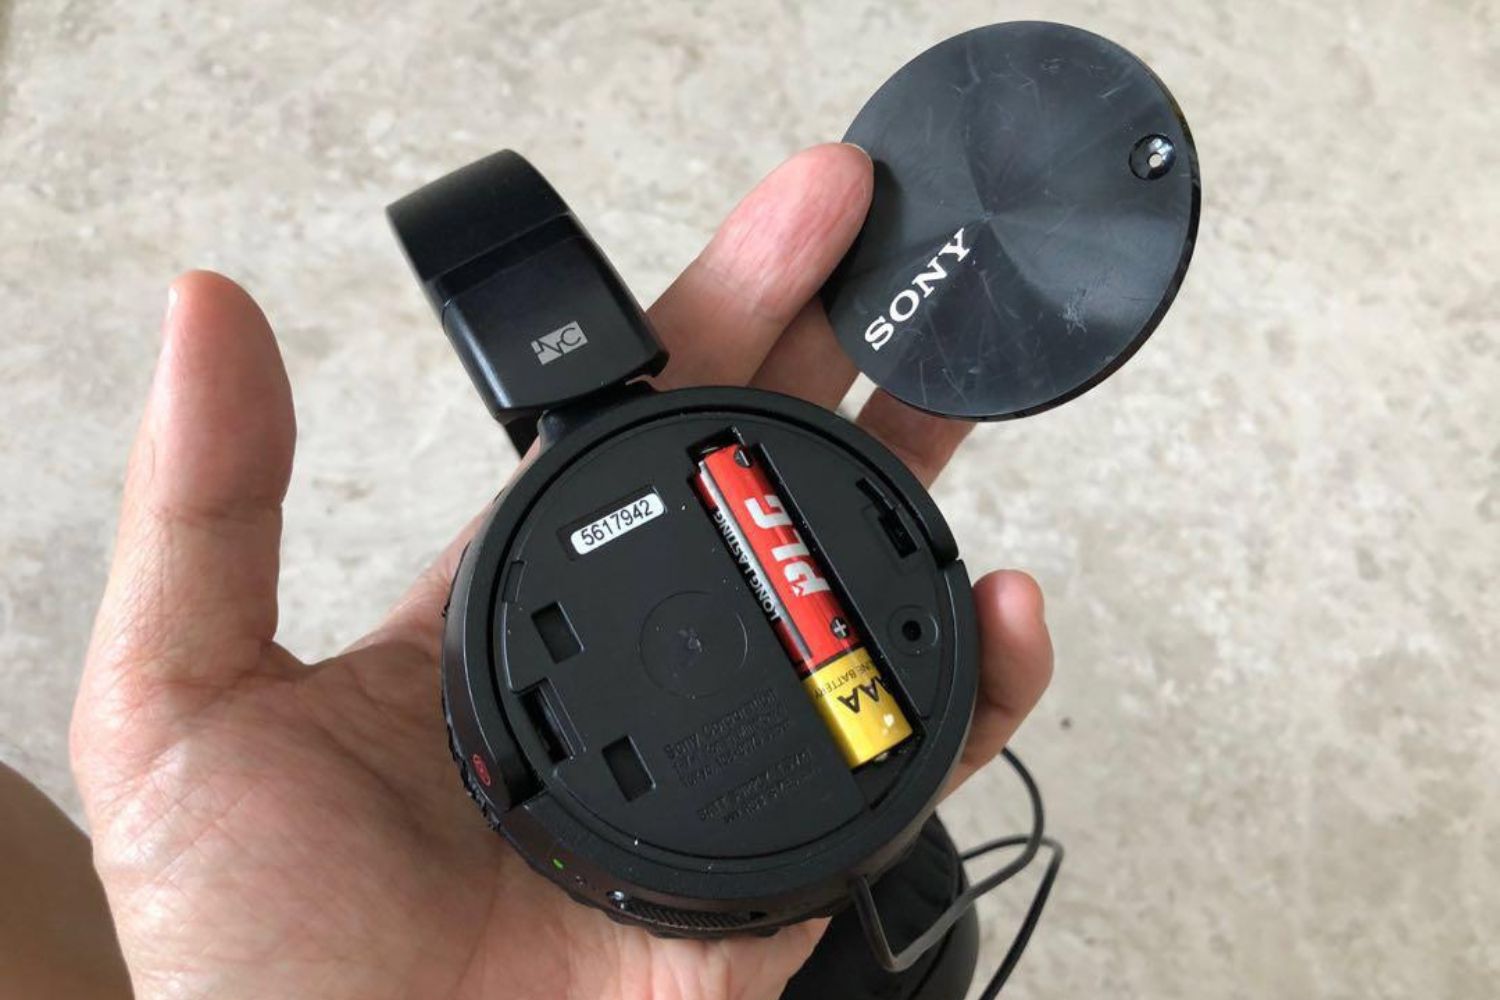 Sony MDR-ZX110NC Noise Cancelling Headphones: How To Change Battery